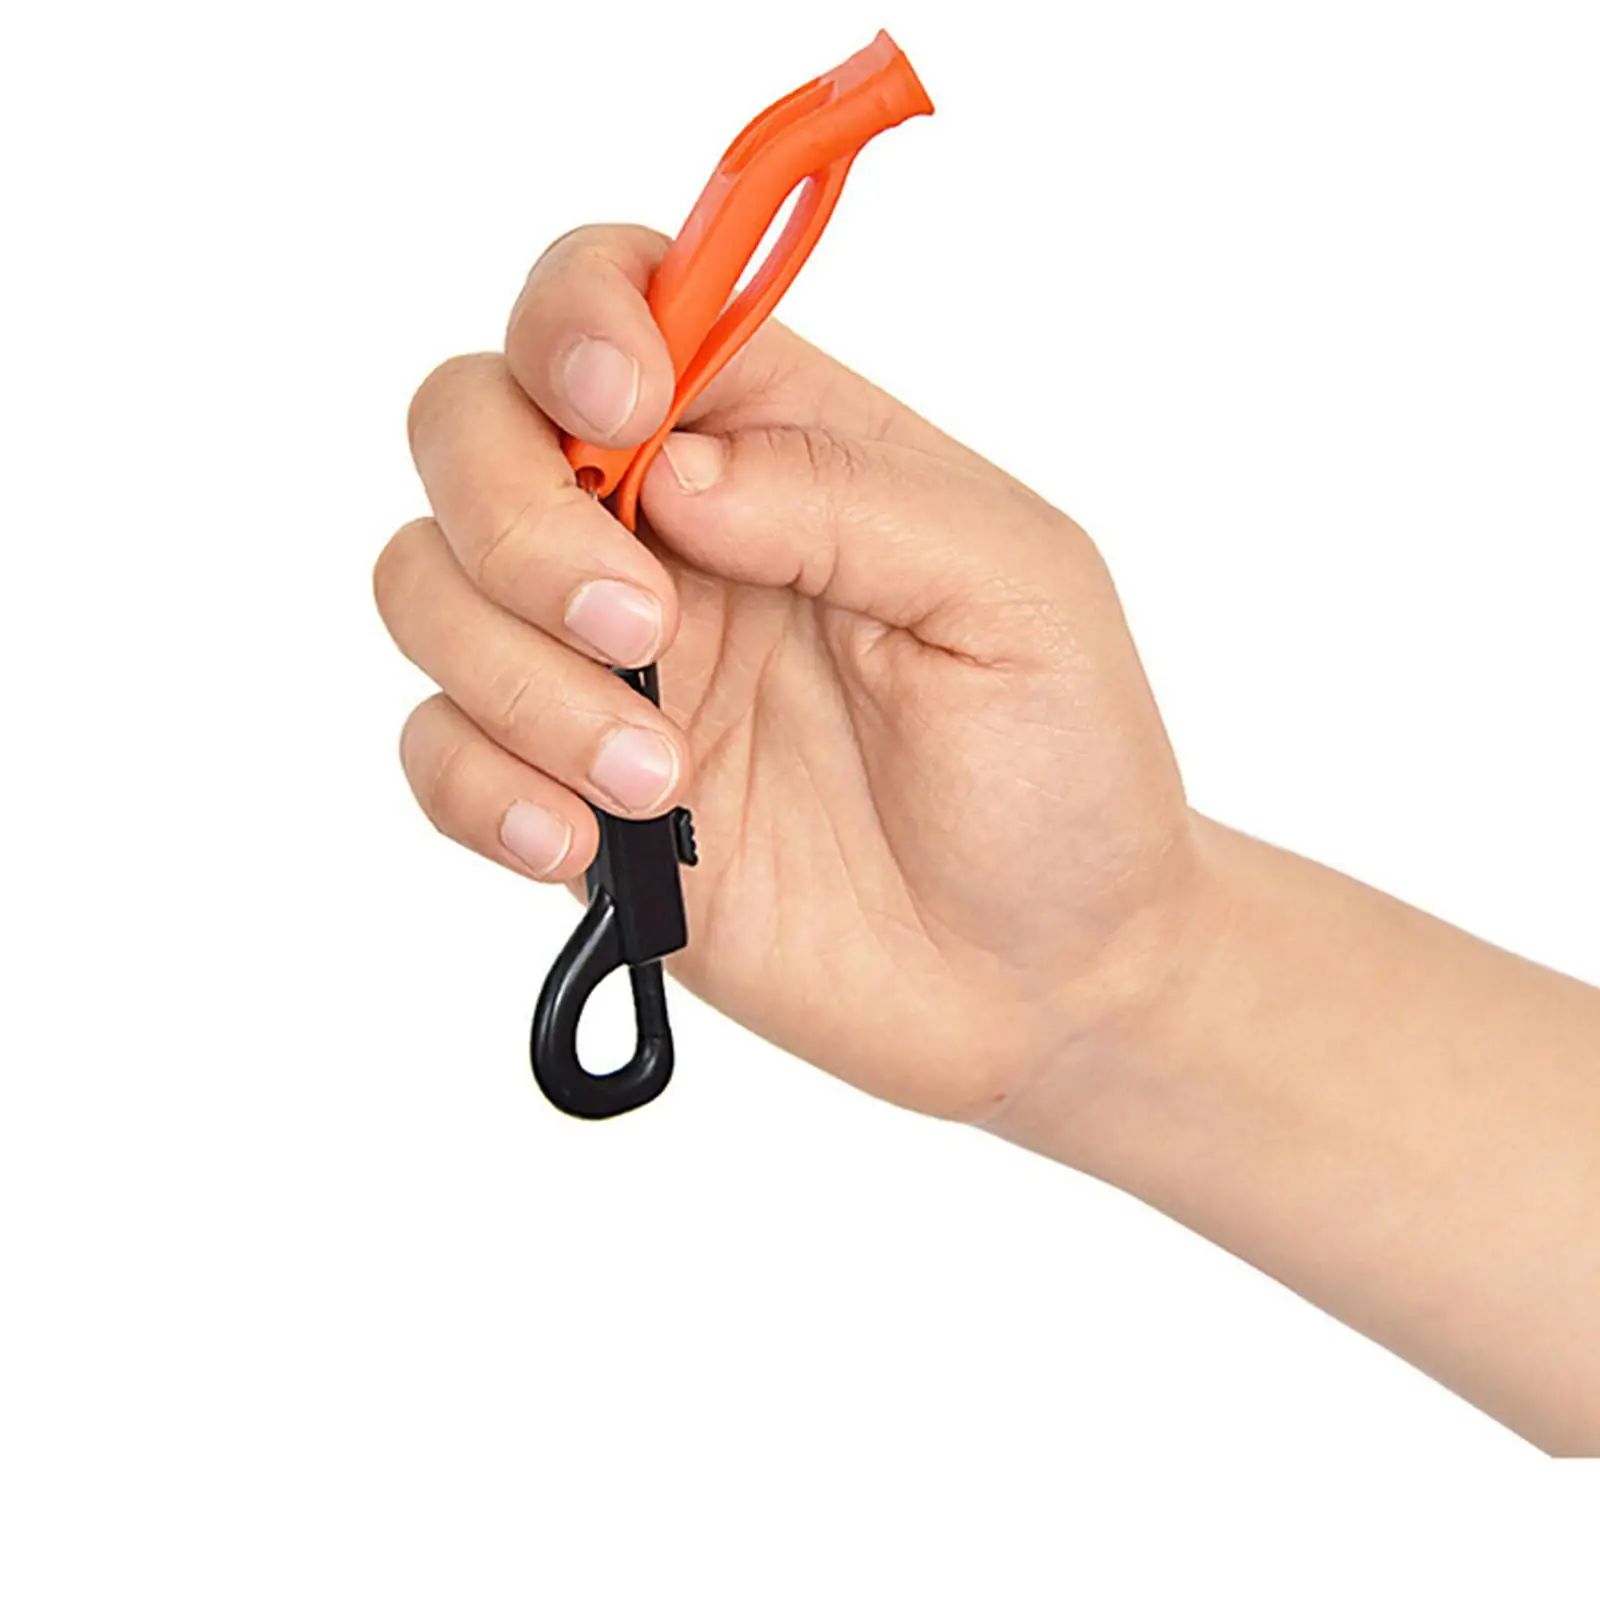 Lightweight Emergency Whistle Survival Whistle with Hook for Boating